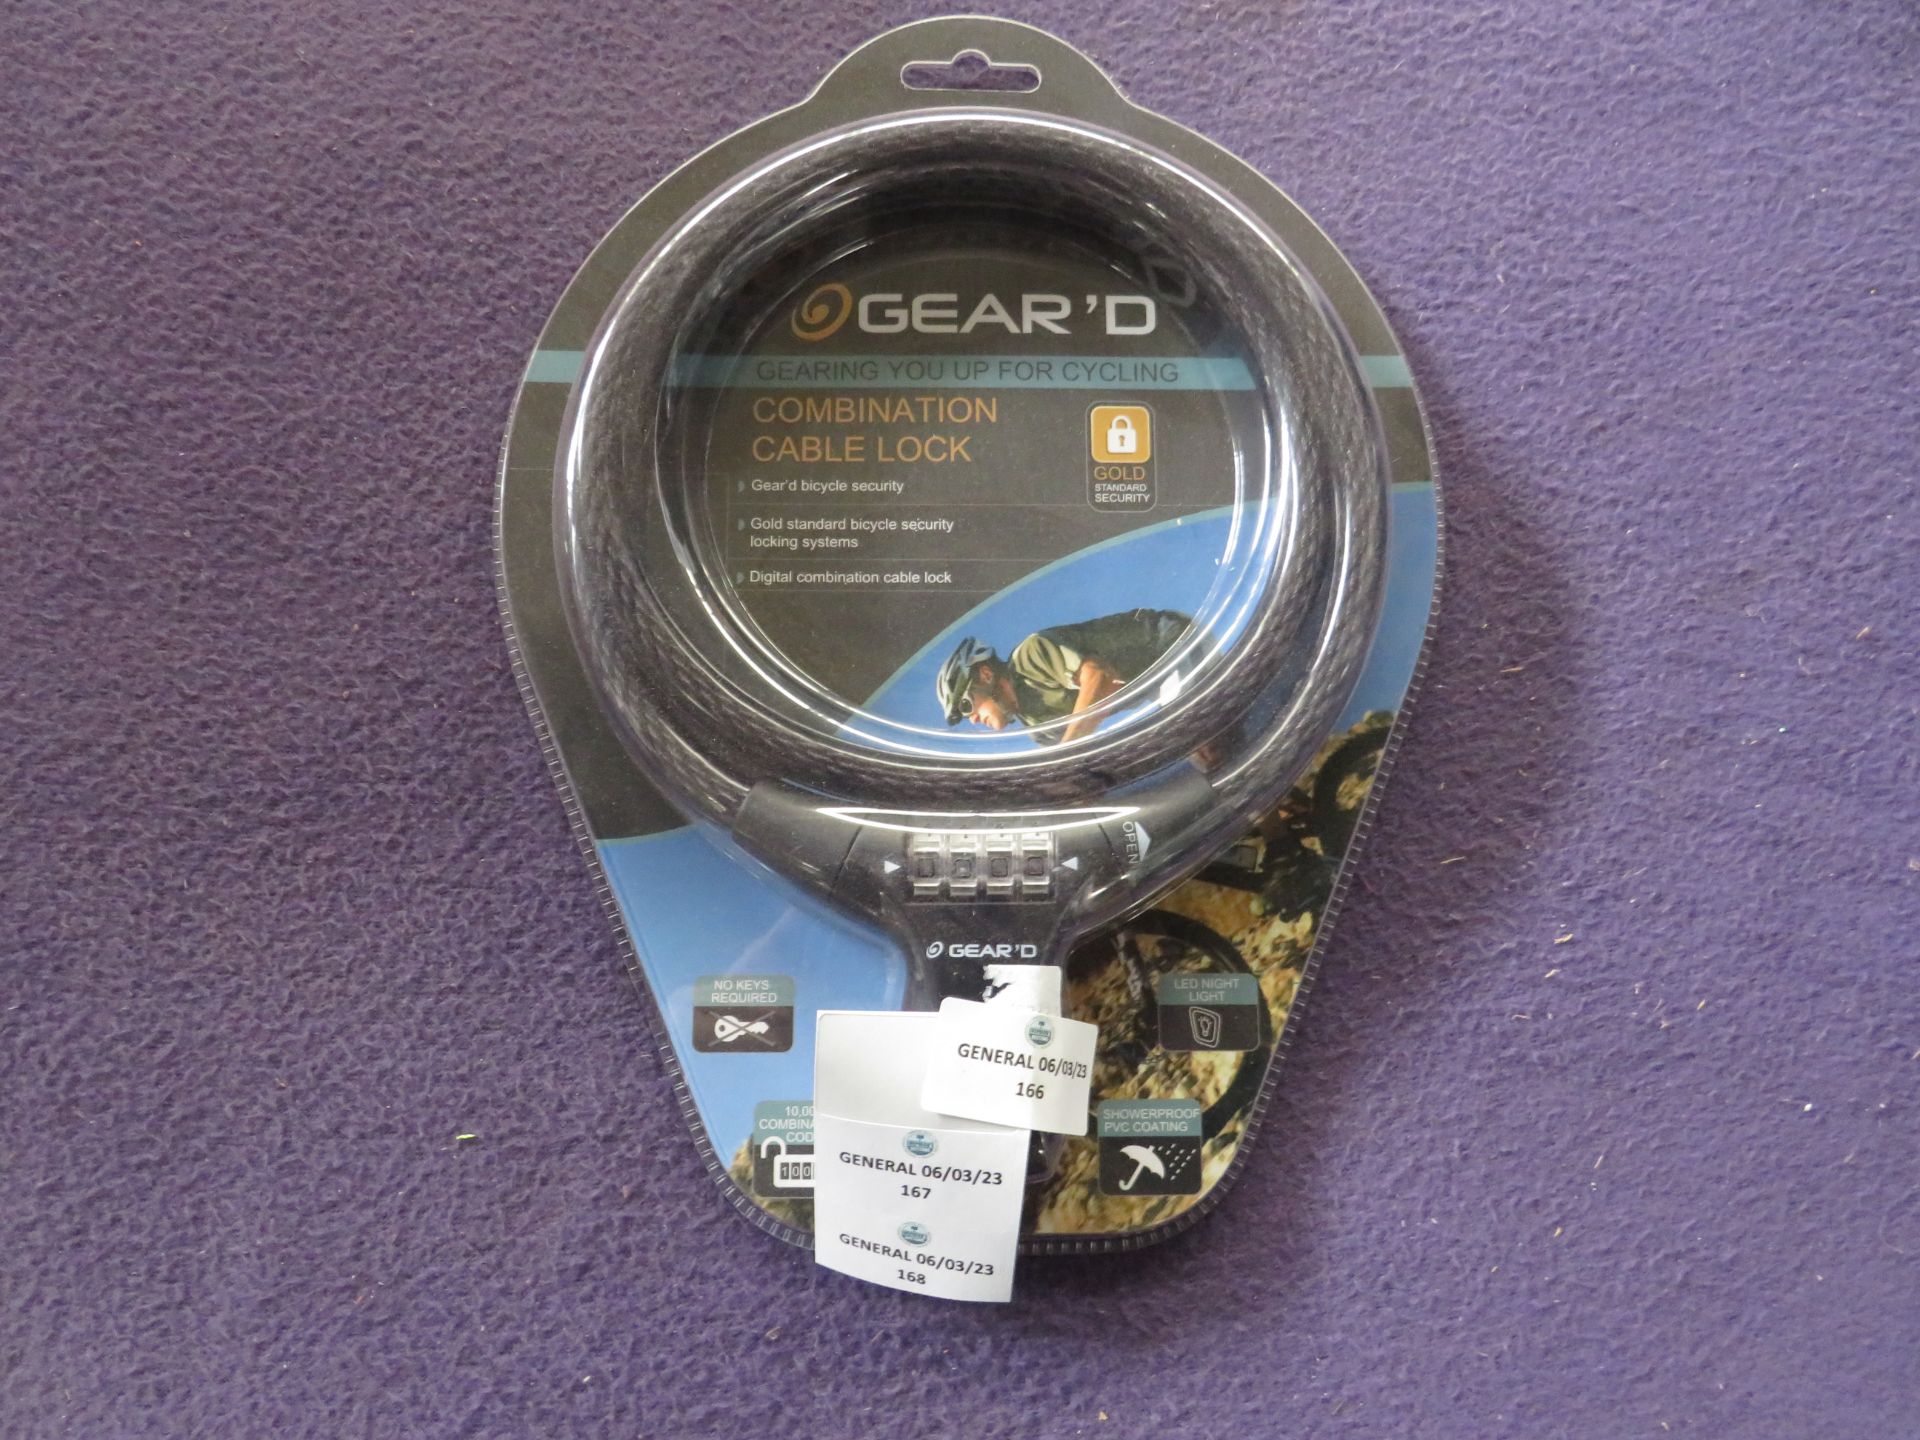 2x Gear'D - Combination Cable Lock for Bicycle - New & Packaged.